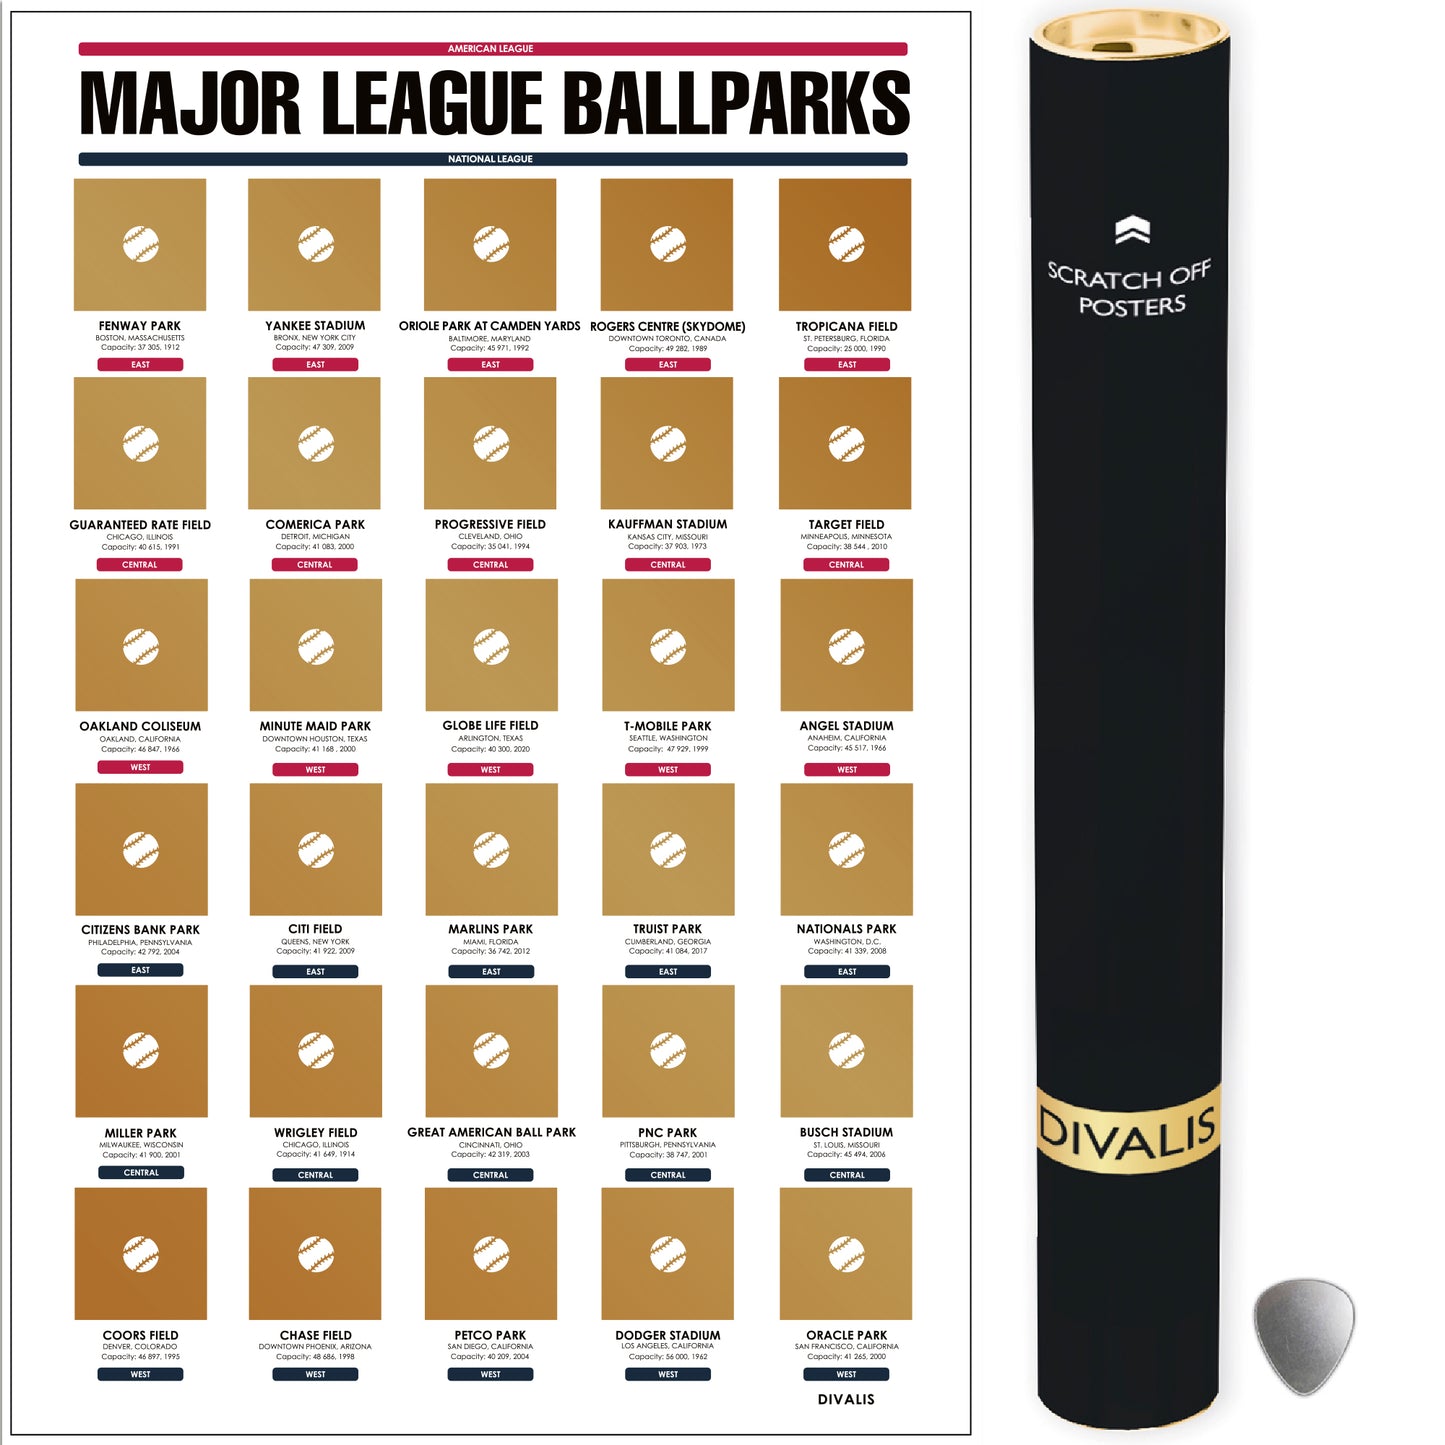 Major League Ballparks Scratch off Poster - Large Easy to Frame 24x16" Baseball Parks Checklist Chart - American and National